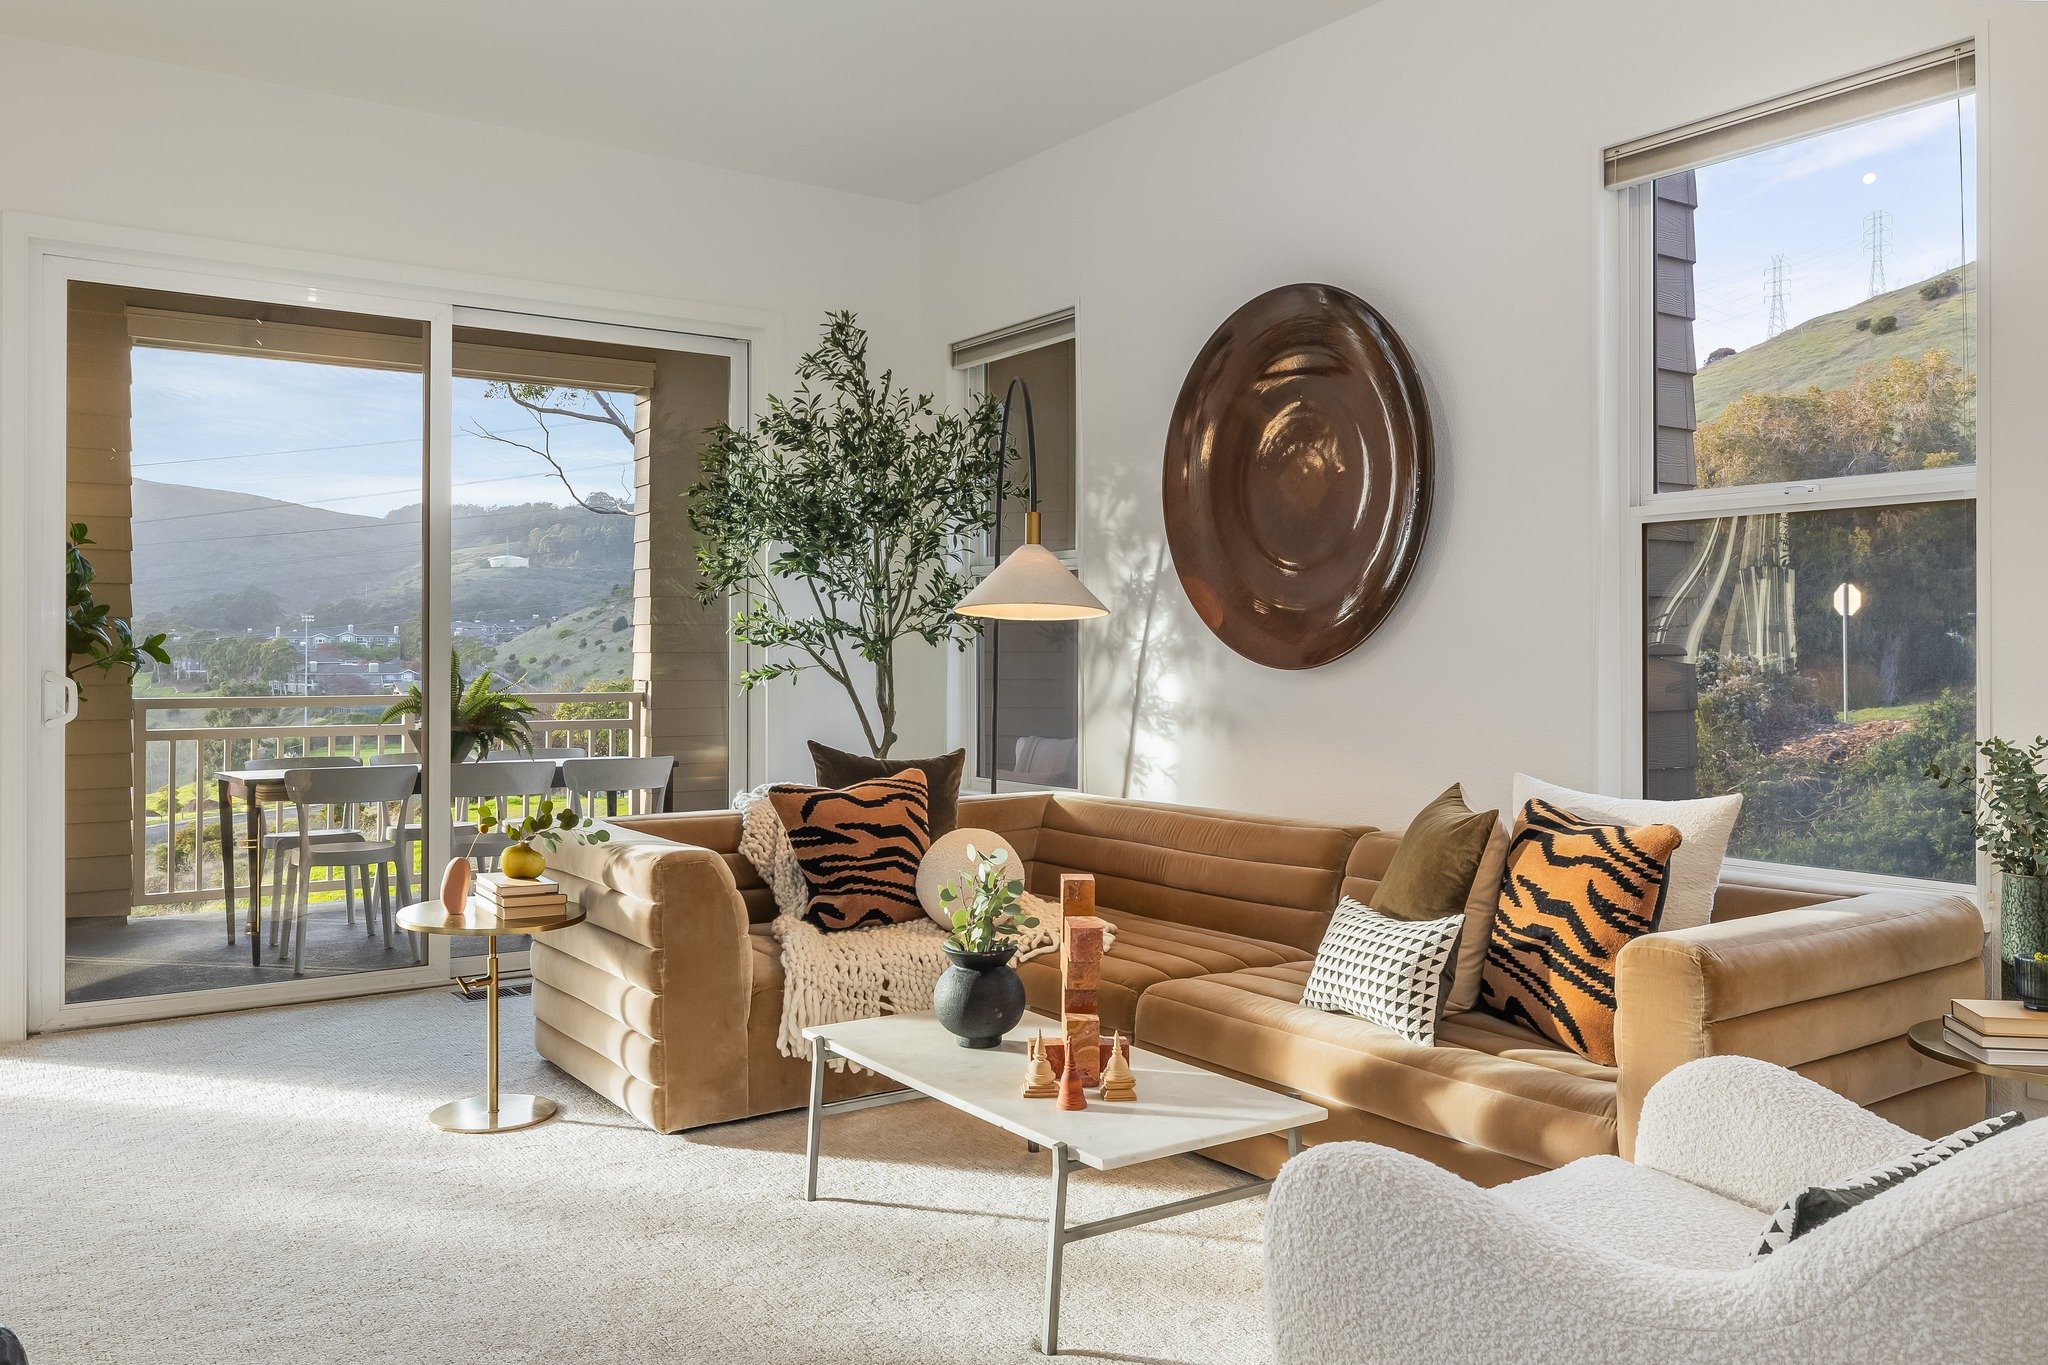 Client Spotlight: Kevin Wakelin, @teamwakelinrealestate 

Welcome to the Viewpoint at The Ridge nestled in the city of Brisbane, perfectly situated just 5 minutes from the urban amenities of San Francisco. Conveniently located near major highways, SF